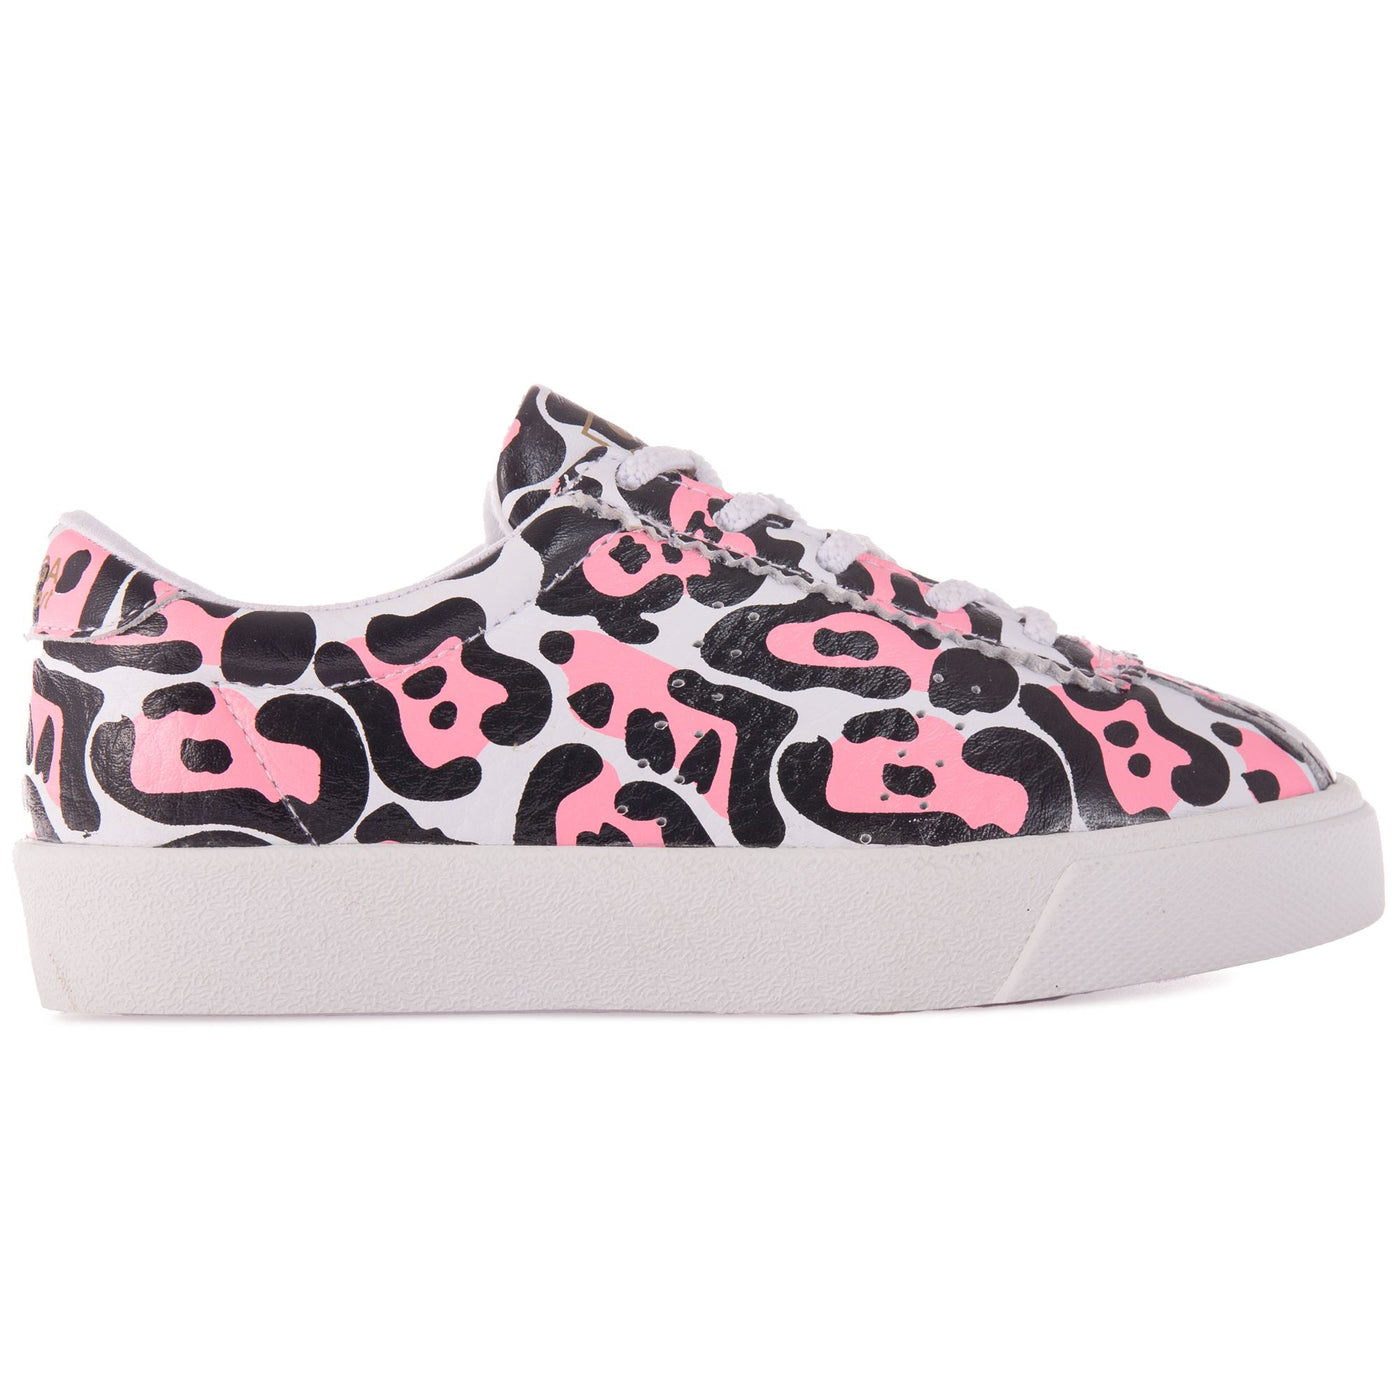 Sneakers Girl 2843 KIDS CLUB S PRINTED LEATHER Low Cut WHITE-COTTON CANDY LEOPARD Dressed Front (jpg Rgb)	